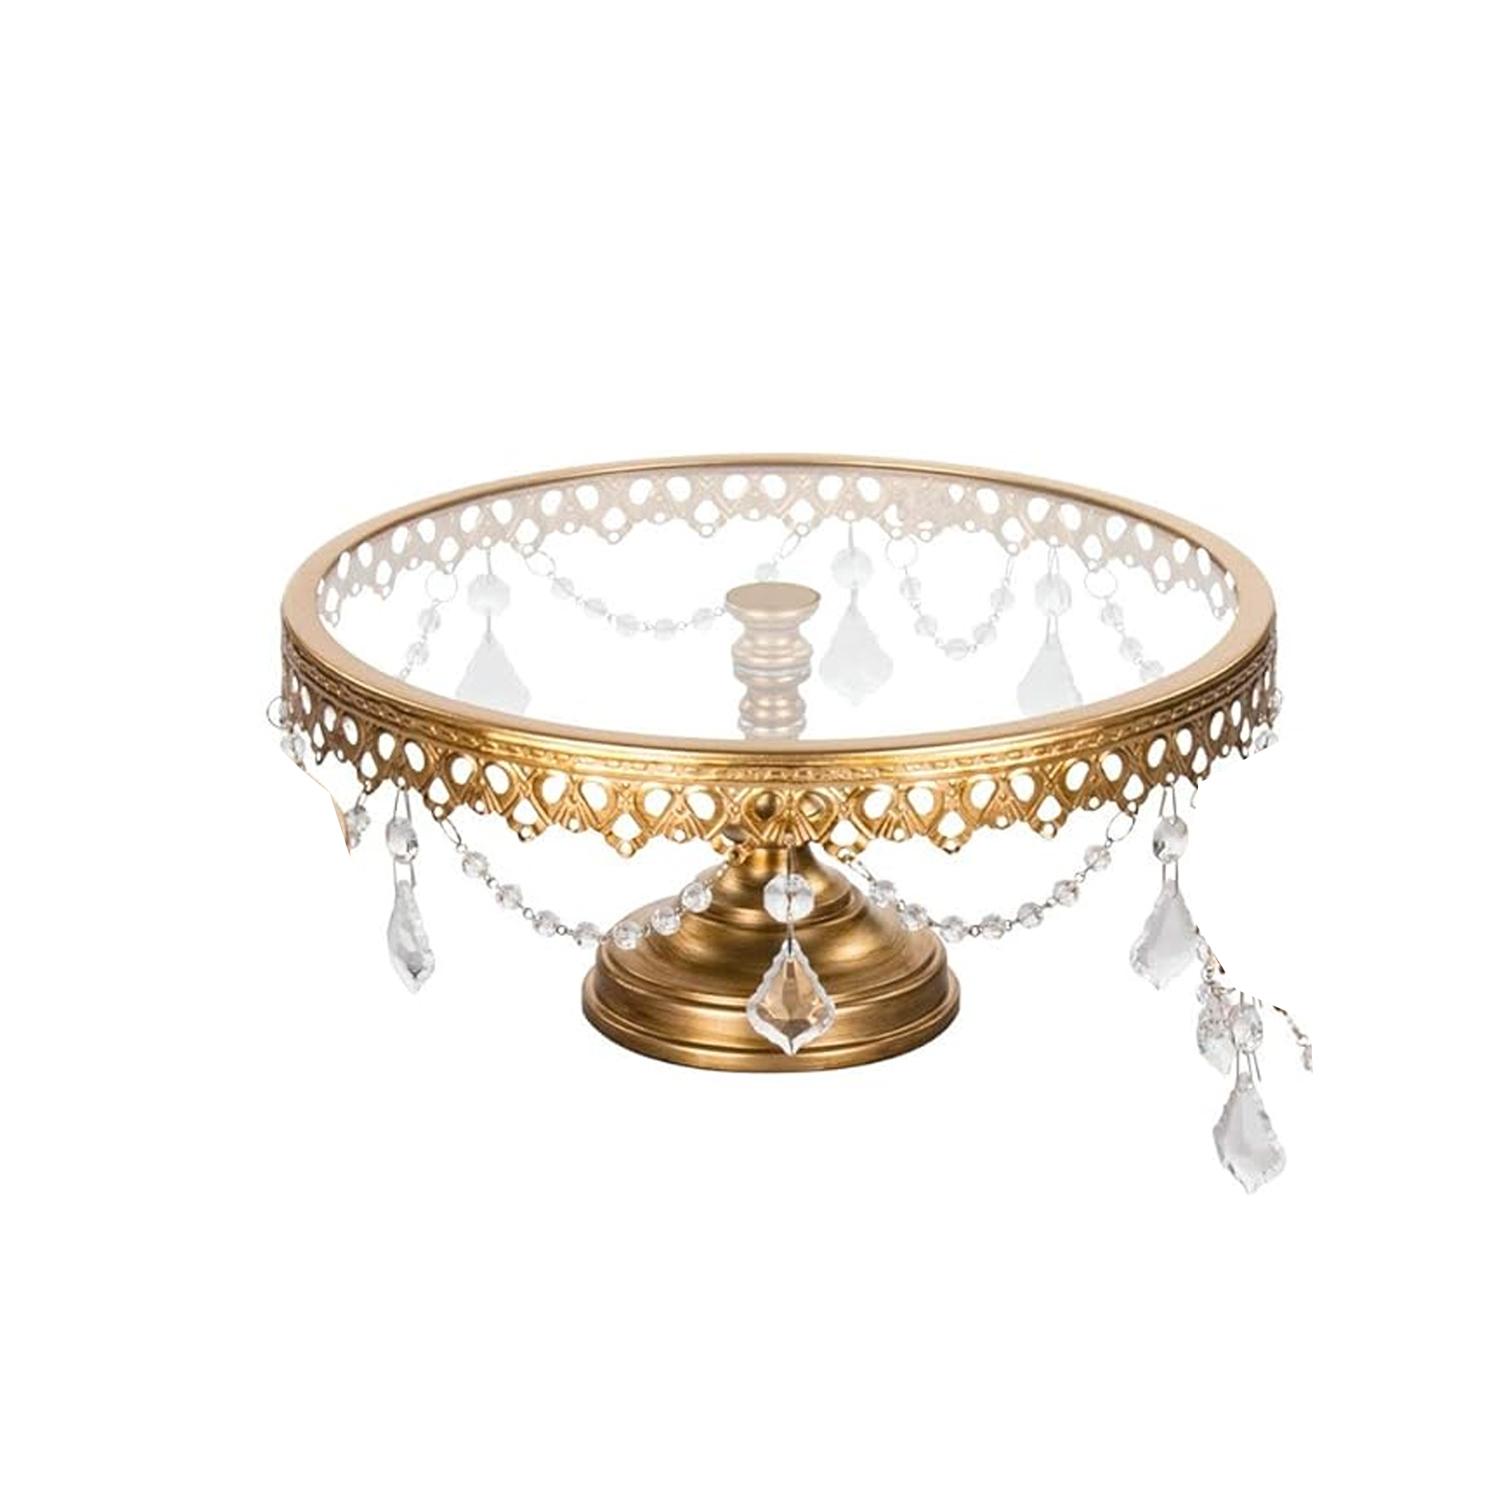 1PC GOLD CLEAR GLASS TOP CAKE STAND DIAMETER 25CM